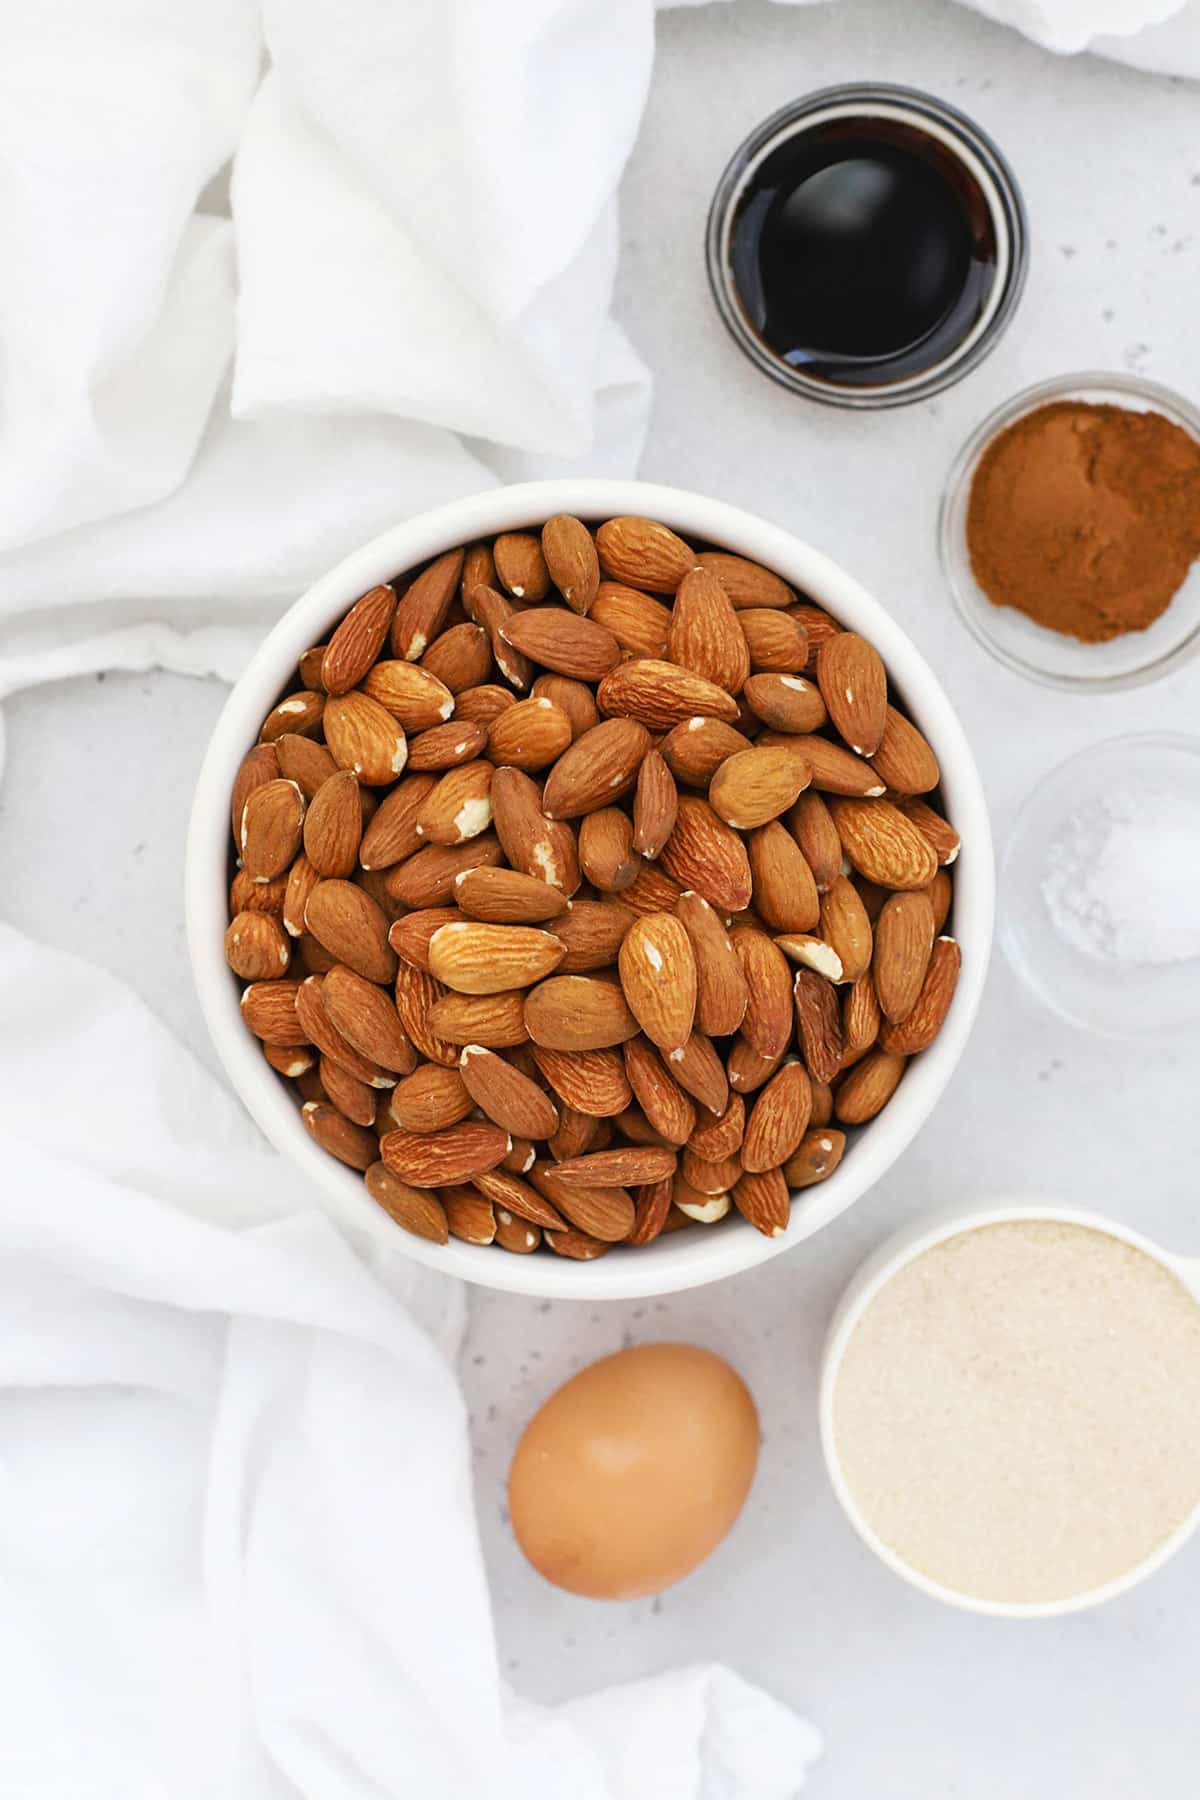 Overhead view of ingredients for cinnamon almonds